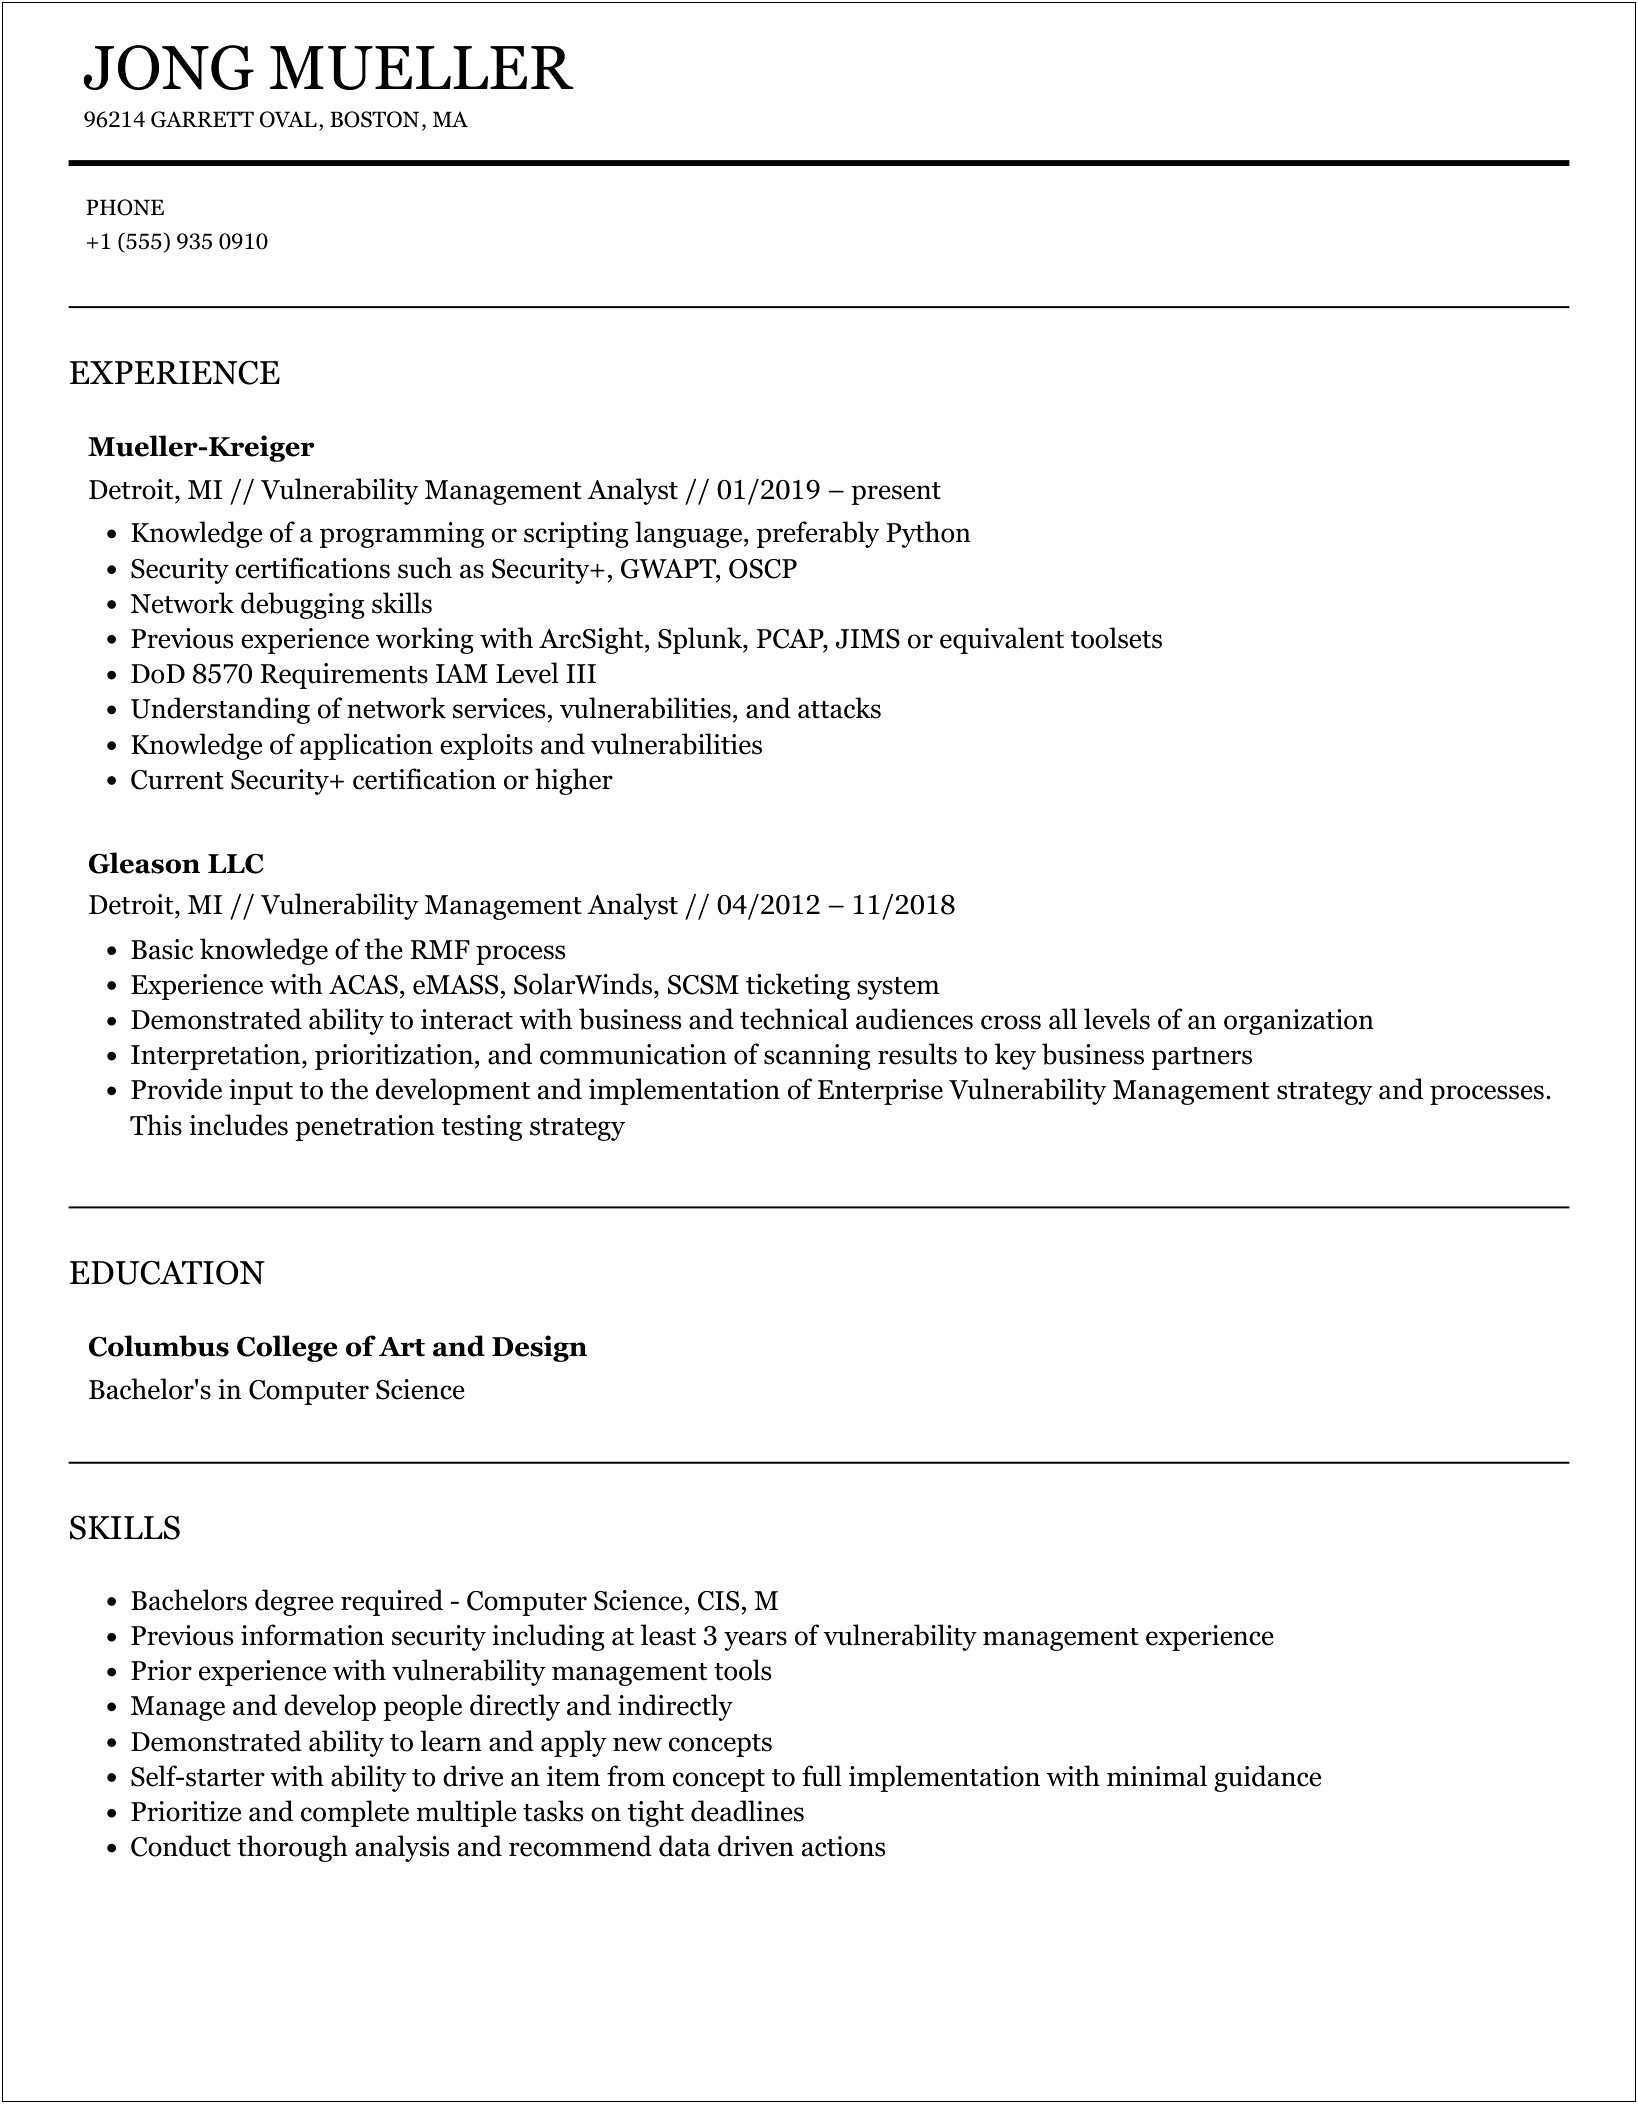 Sample Of Resume On Vulnerability Remediation